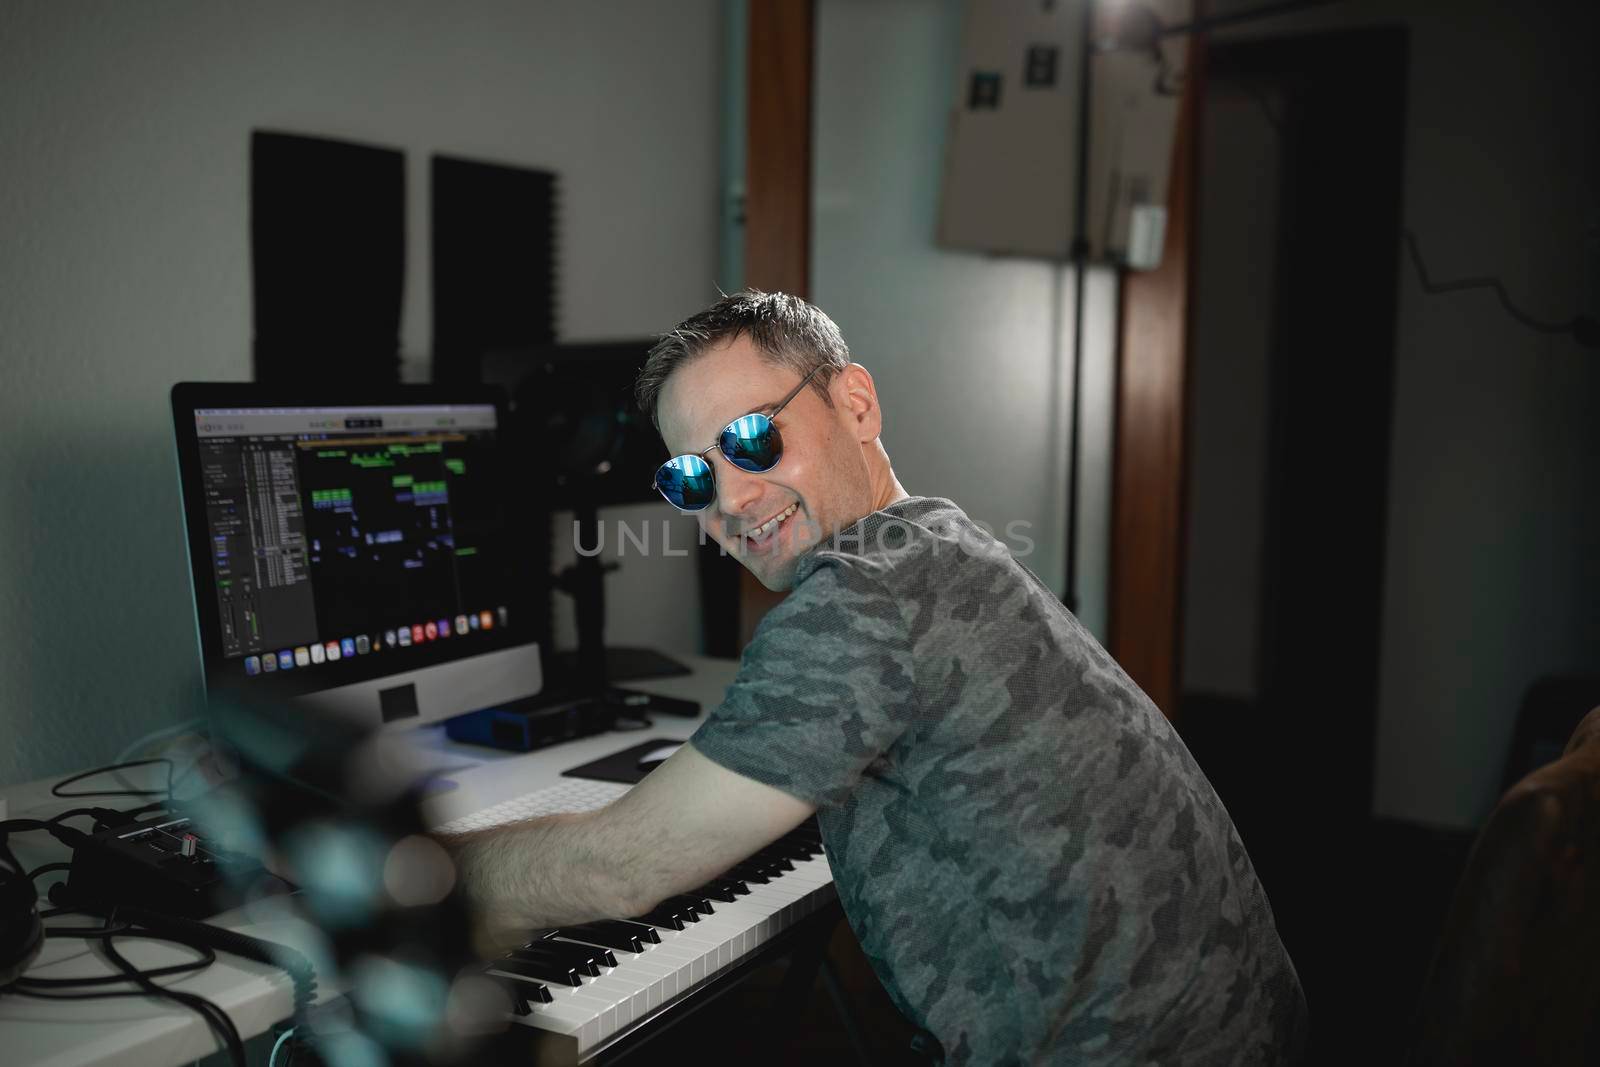 Musician and producer looks at camera smiling with joy while working on a project at his home studio